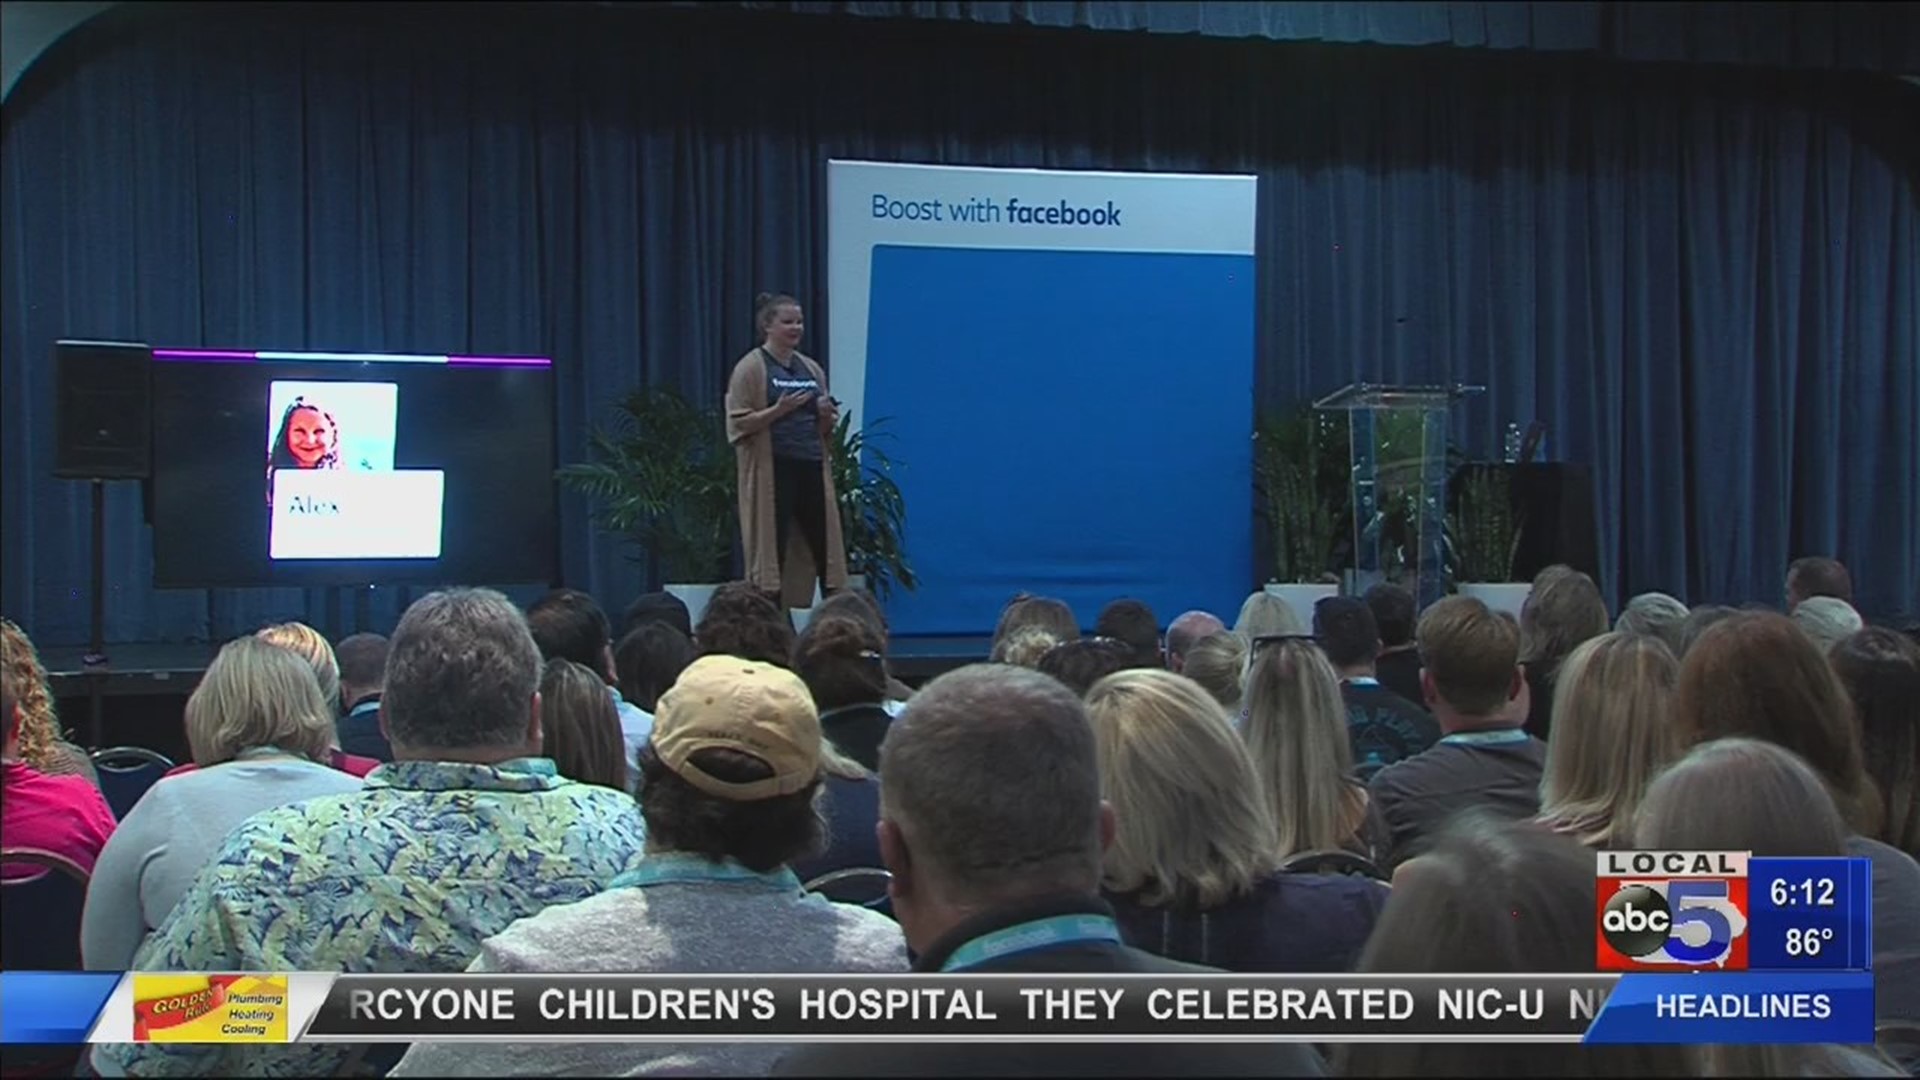 Facebook "boosts" local small businesses